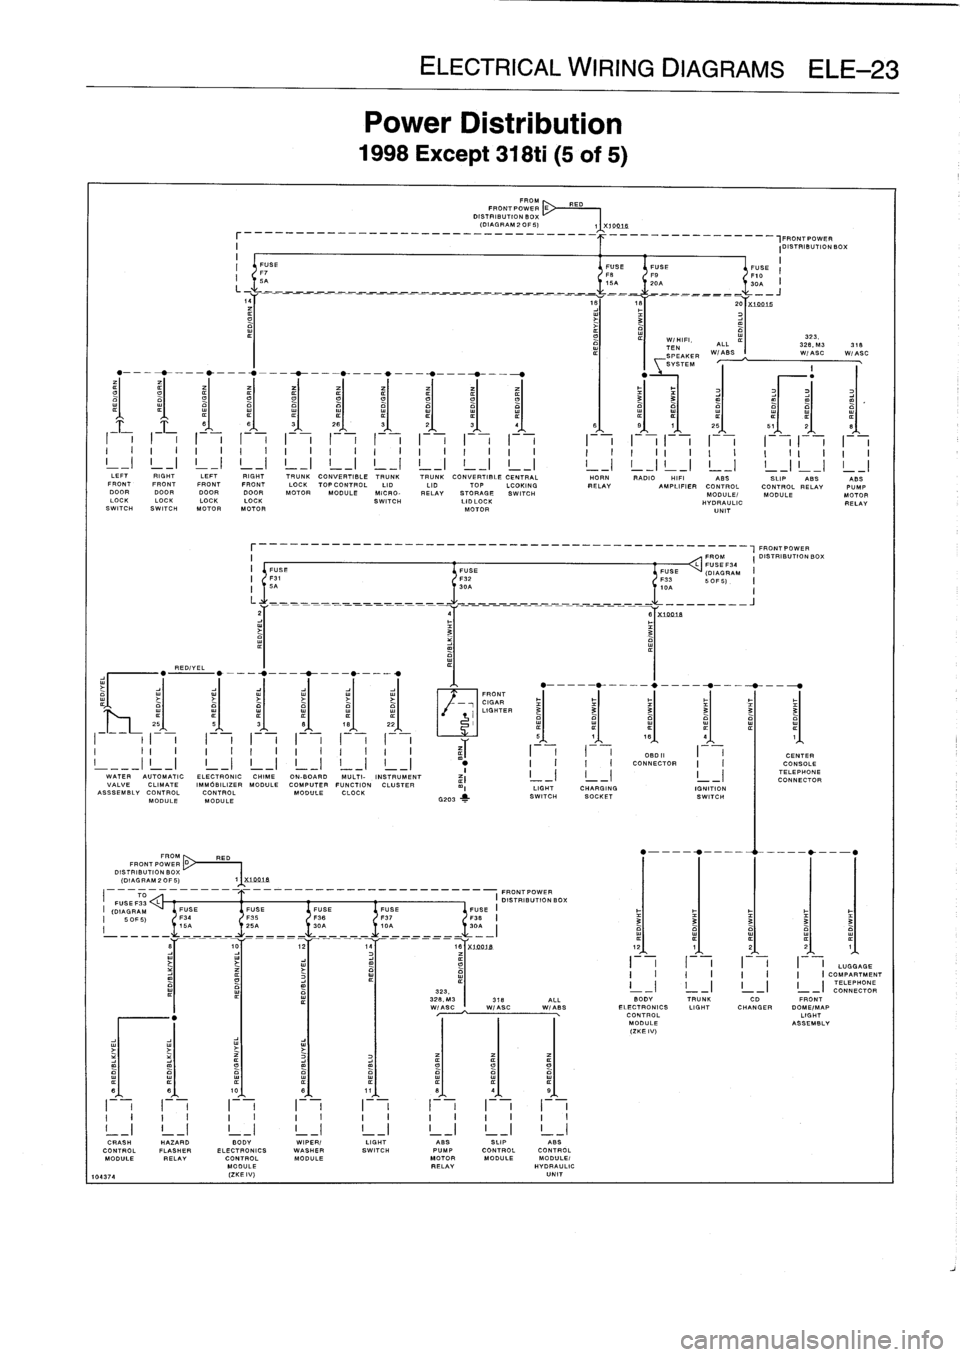 BMW 328i 1997 E36 Owners Manual 
REDIYEL

FROM
RED
FRONT
PO
WE
R
D~
DISTRIBUTION
BOX
(DIAGRAM
2
OF
5)

_
_
_
_
_
_
_
_
_
_
__
,FRONTPOWER
I

	

IDISTRIBUTIONBOX
I

	

II
FUSE

	

FUSEFUSE

	

FUSE
F7

	

FS

	

FO

	

F10
I
I
5A

	
